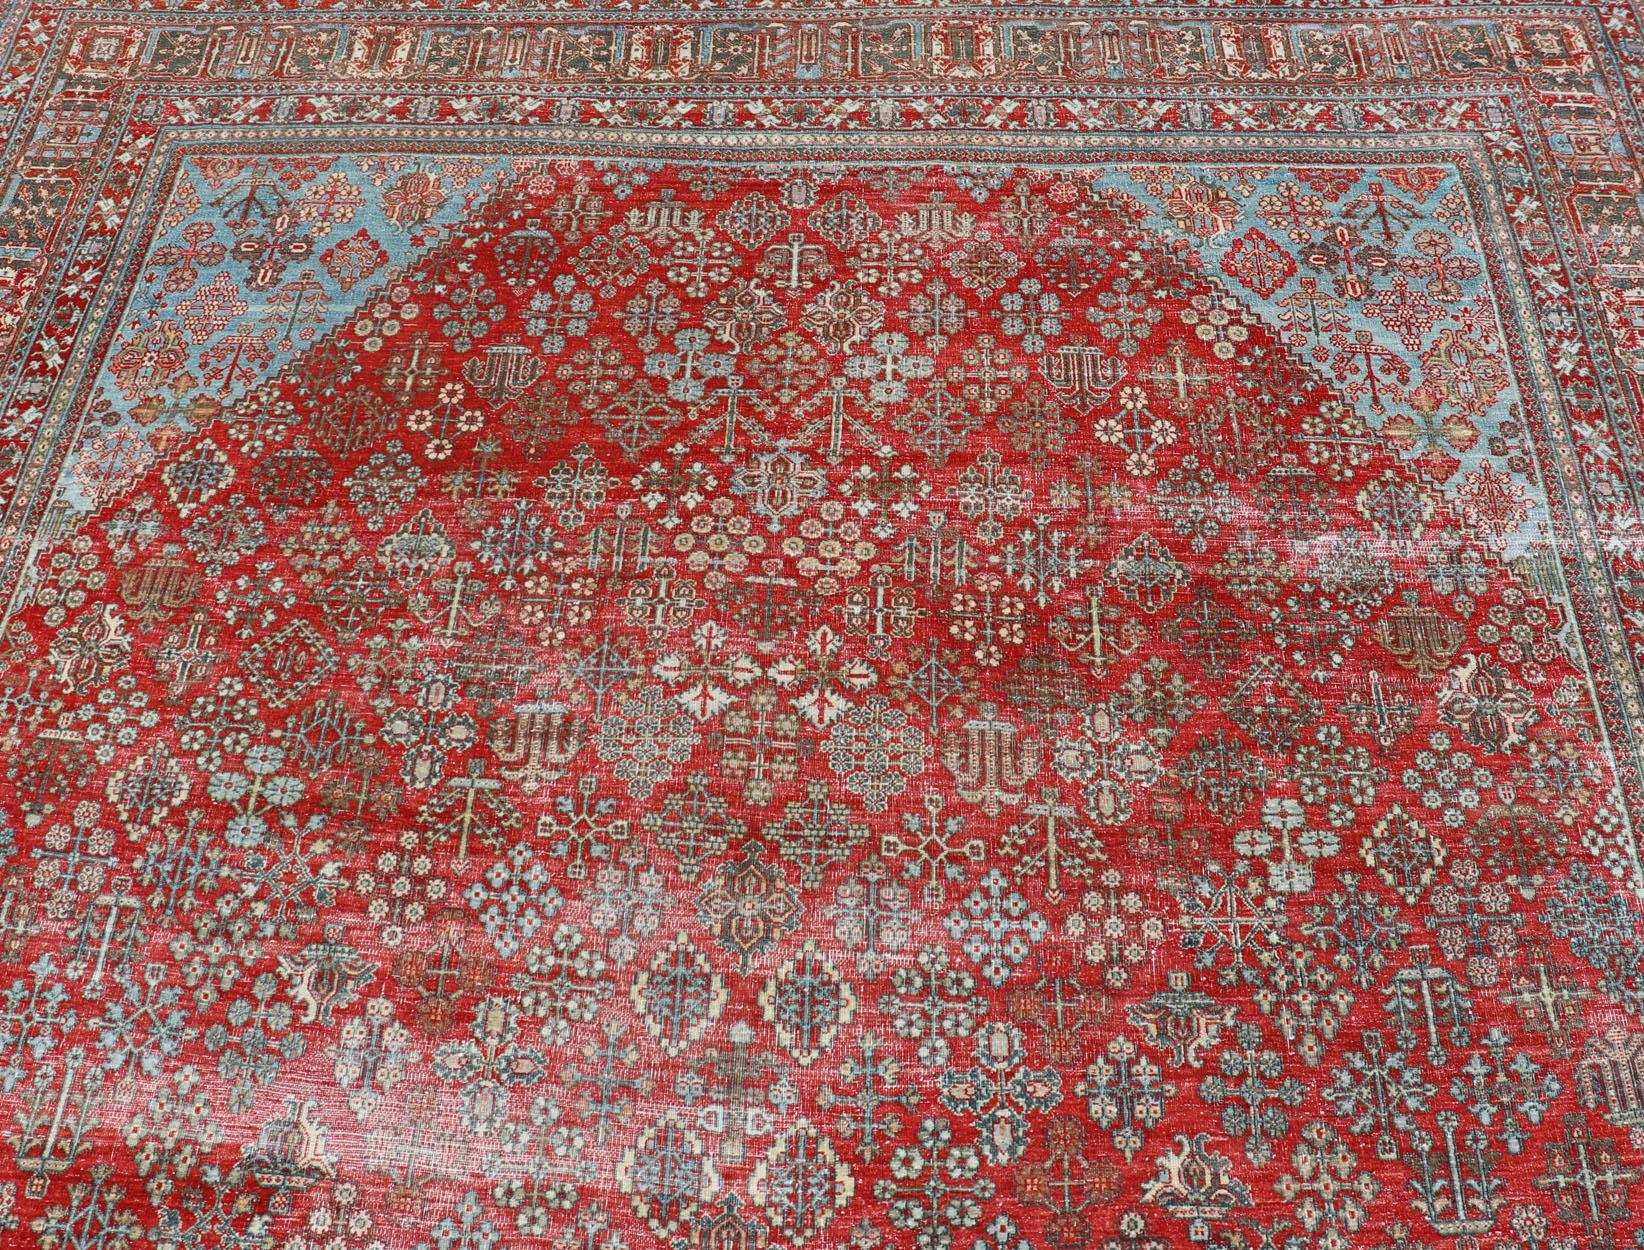 Antique Persian Joshegan rug with geometric medallion design in red and light blue, rug EMB-9613-P13524, country of origin / type: Iran / Joshegan, circa 1930

Measures: 9'6 x 12'3 

This antique Joshegan rug from 1930's was handwoven and bears